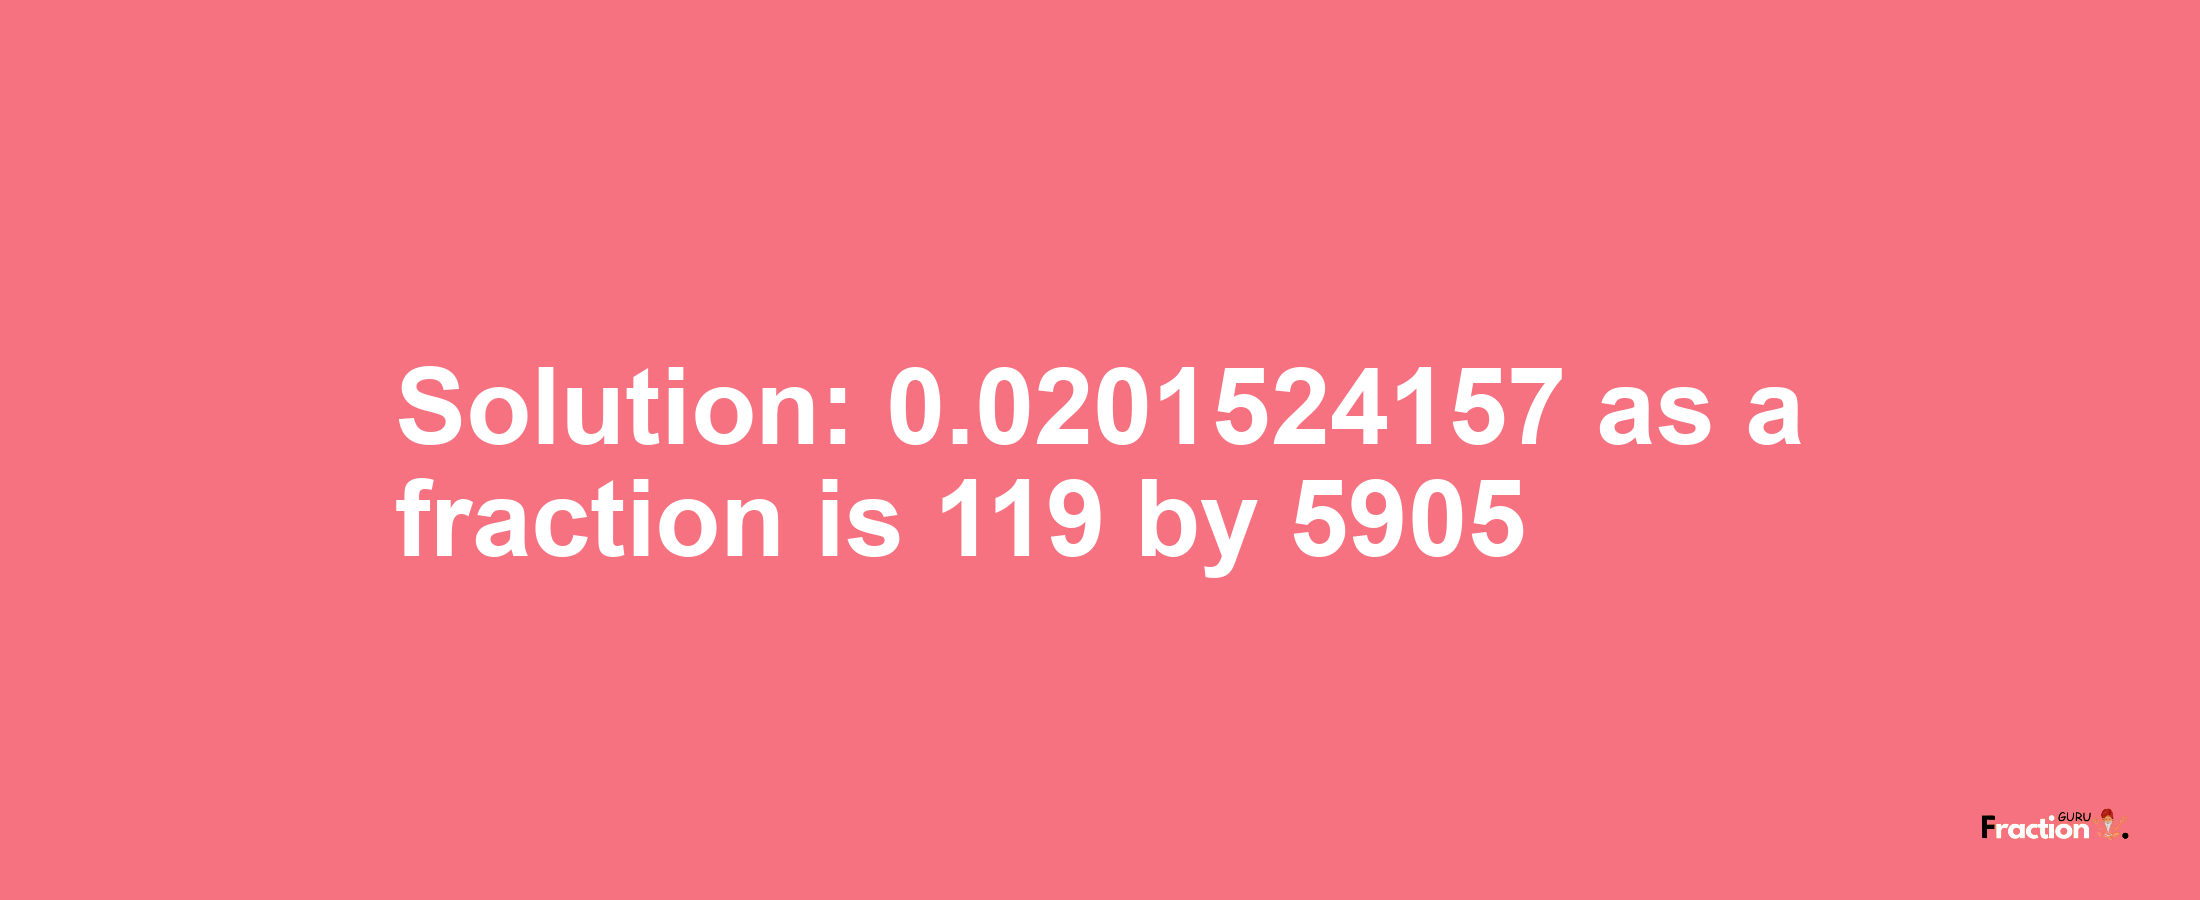 Solution:0.0201524157 as a fraction is 119/5905